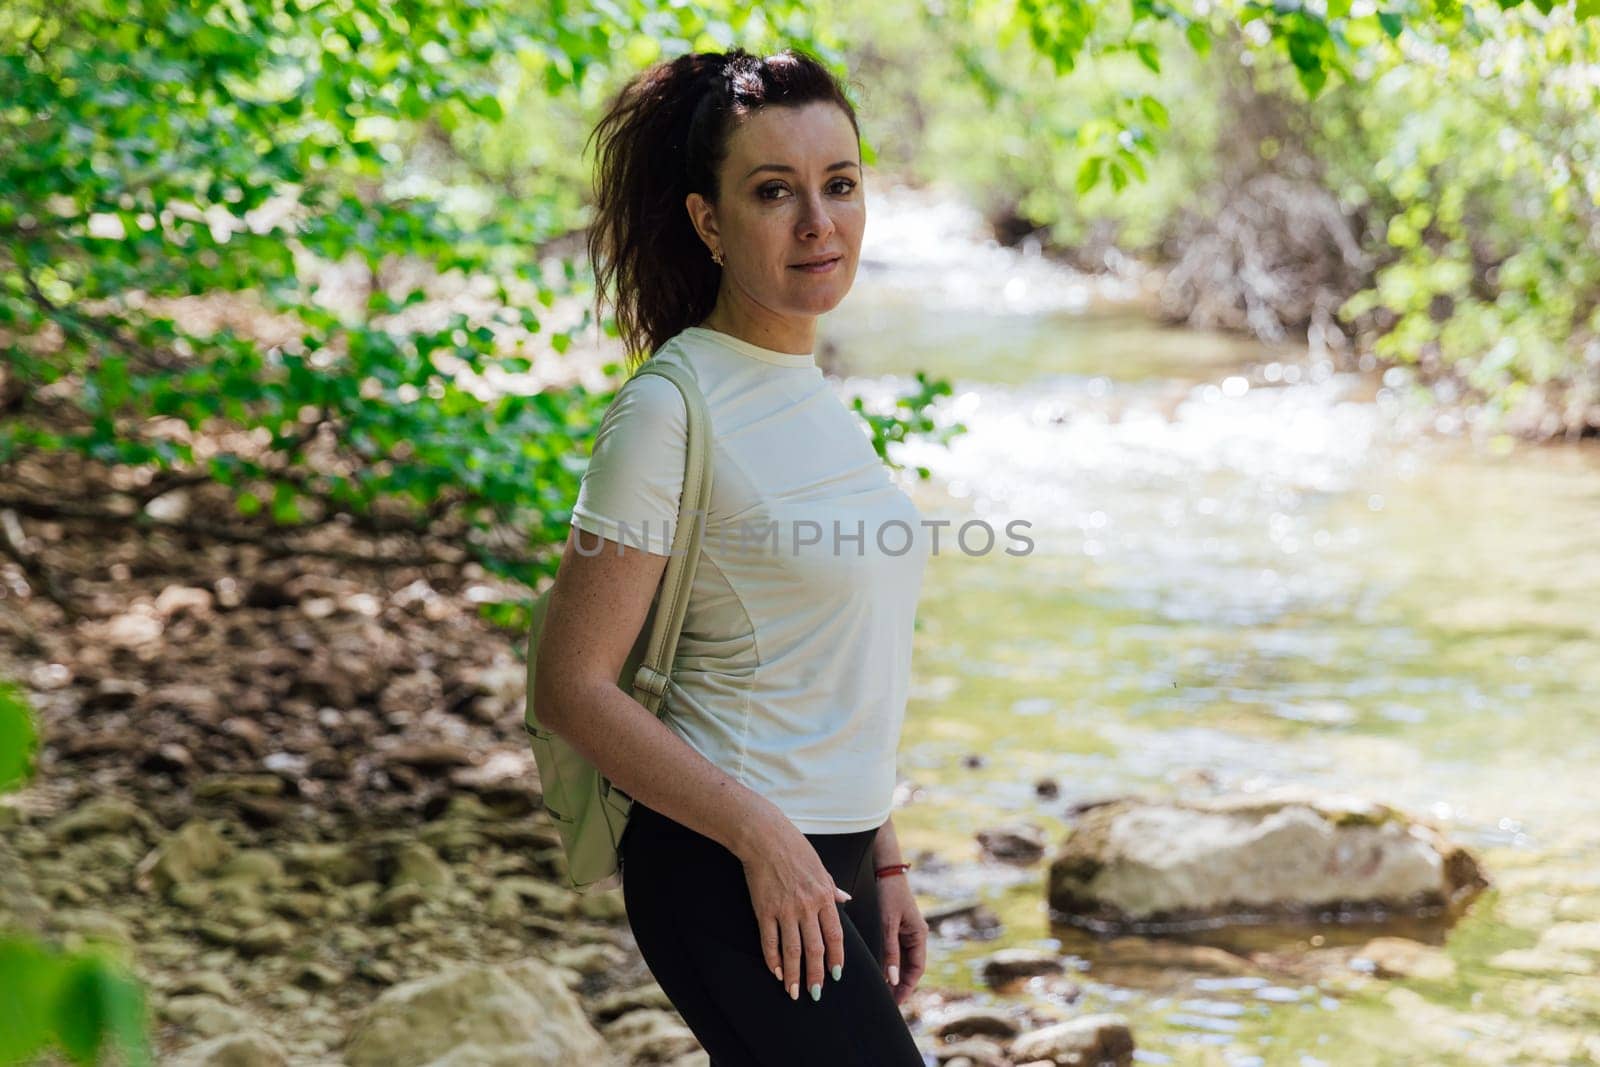 woman with a backpack on a hike stands by the river in a forest of green trees